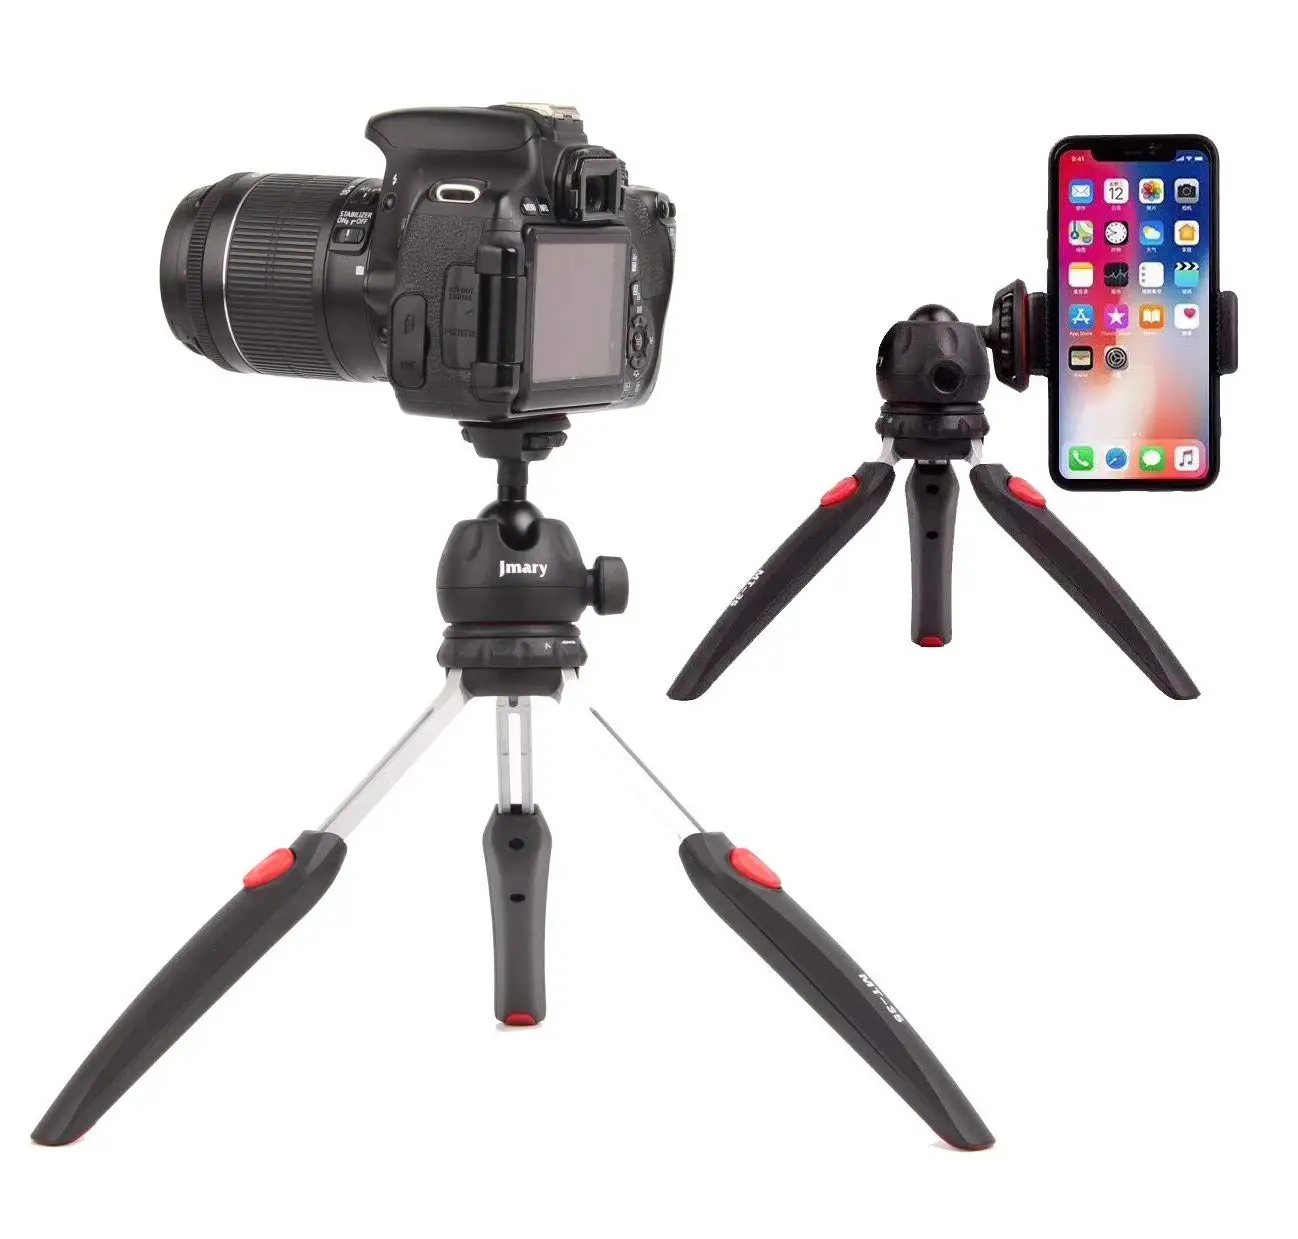 

New Jmary MT-35 Table Top Mini Portable Foldable Extendable Tripod Stand for Mobile and DSLR & Digital Camera with phone holder